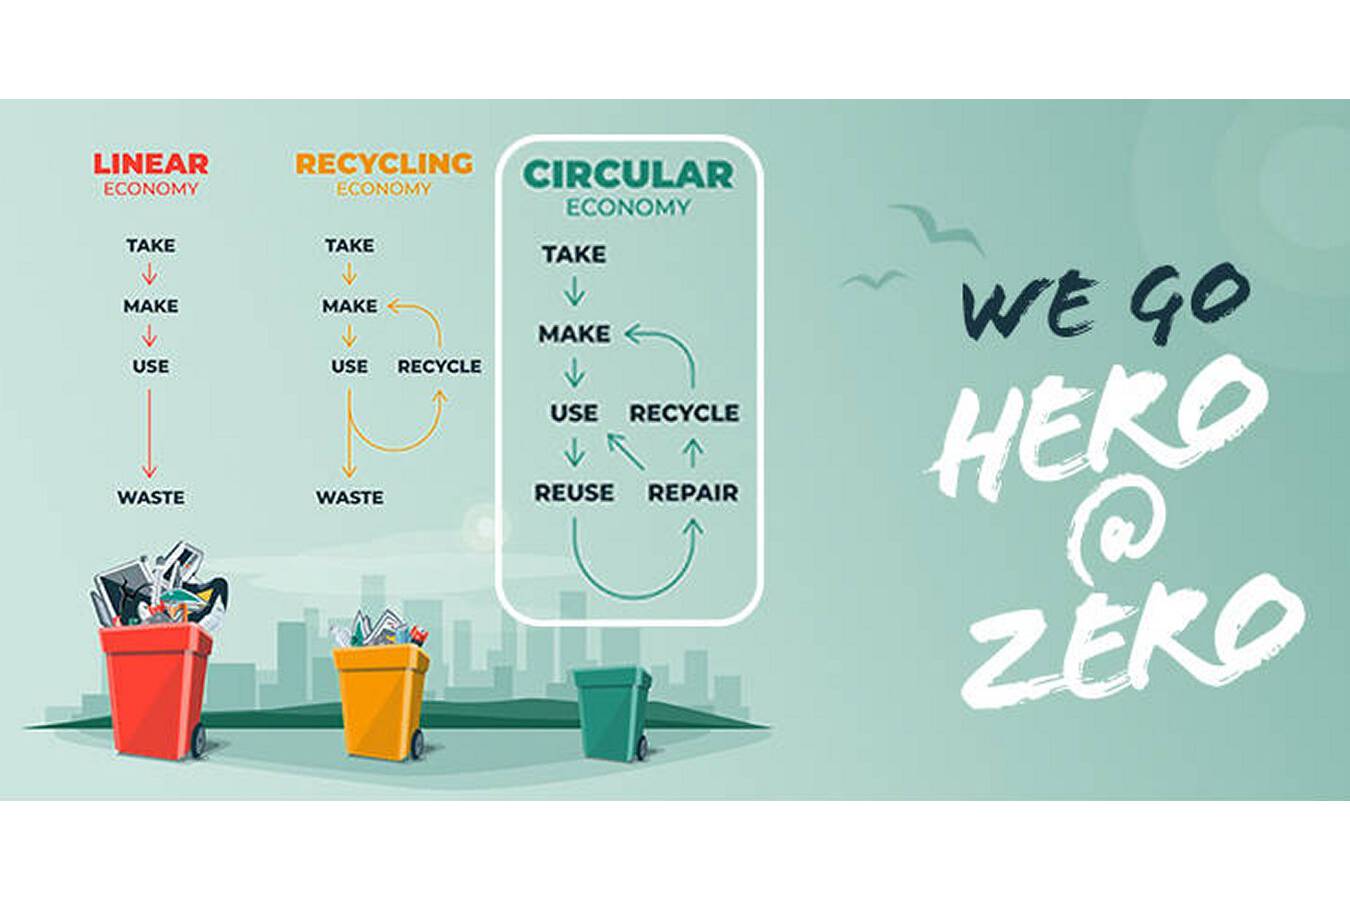 Hero@Zero: Masterflex transforms business mode The Masterflex Group is revolutionizing the market for hoses and connecting systems and transforming it into a circular economy.